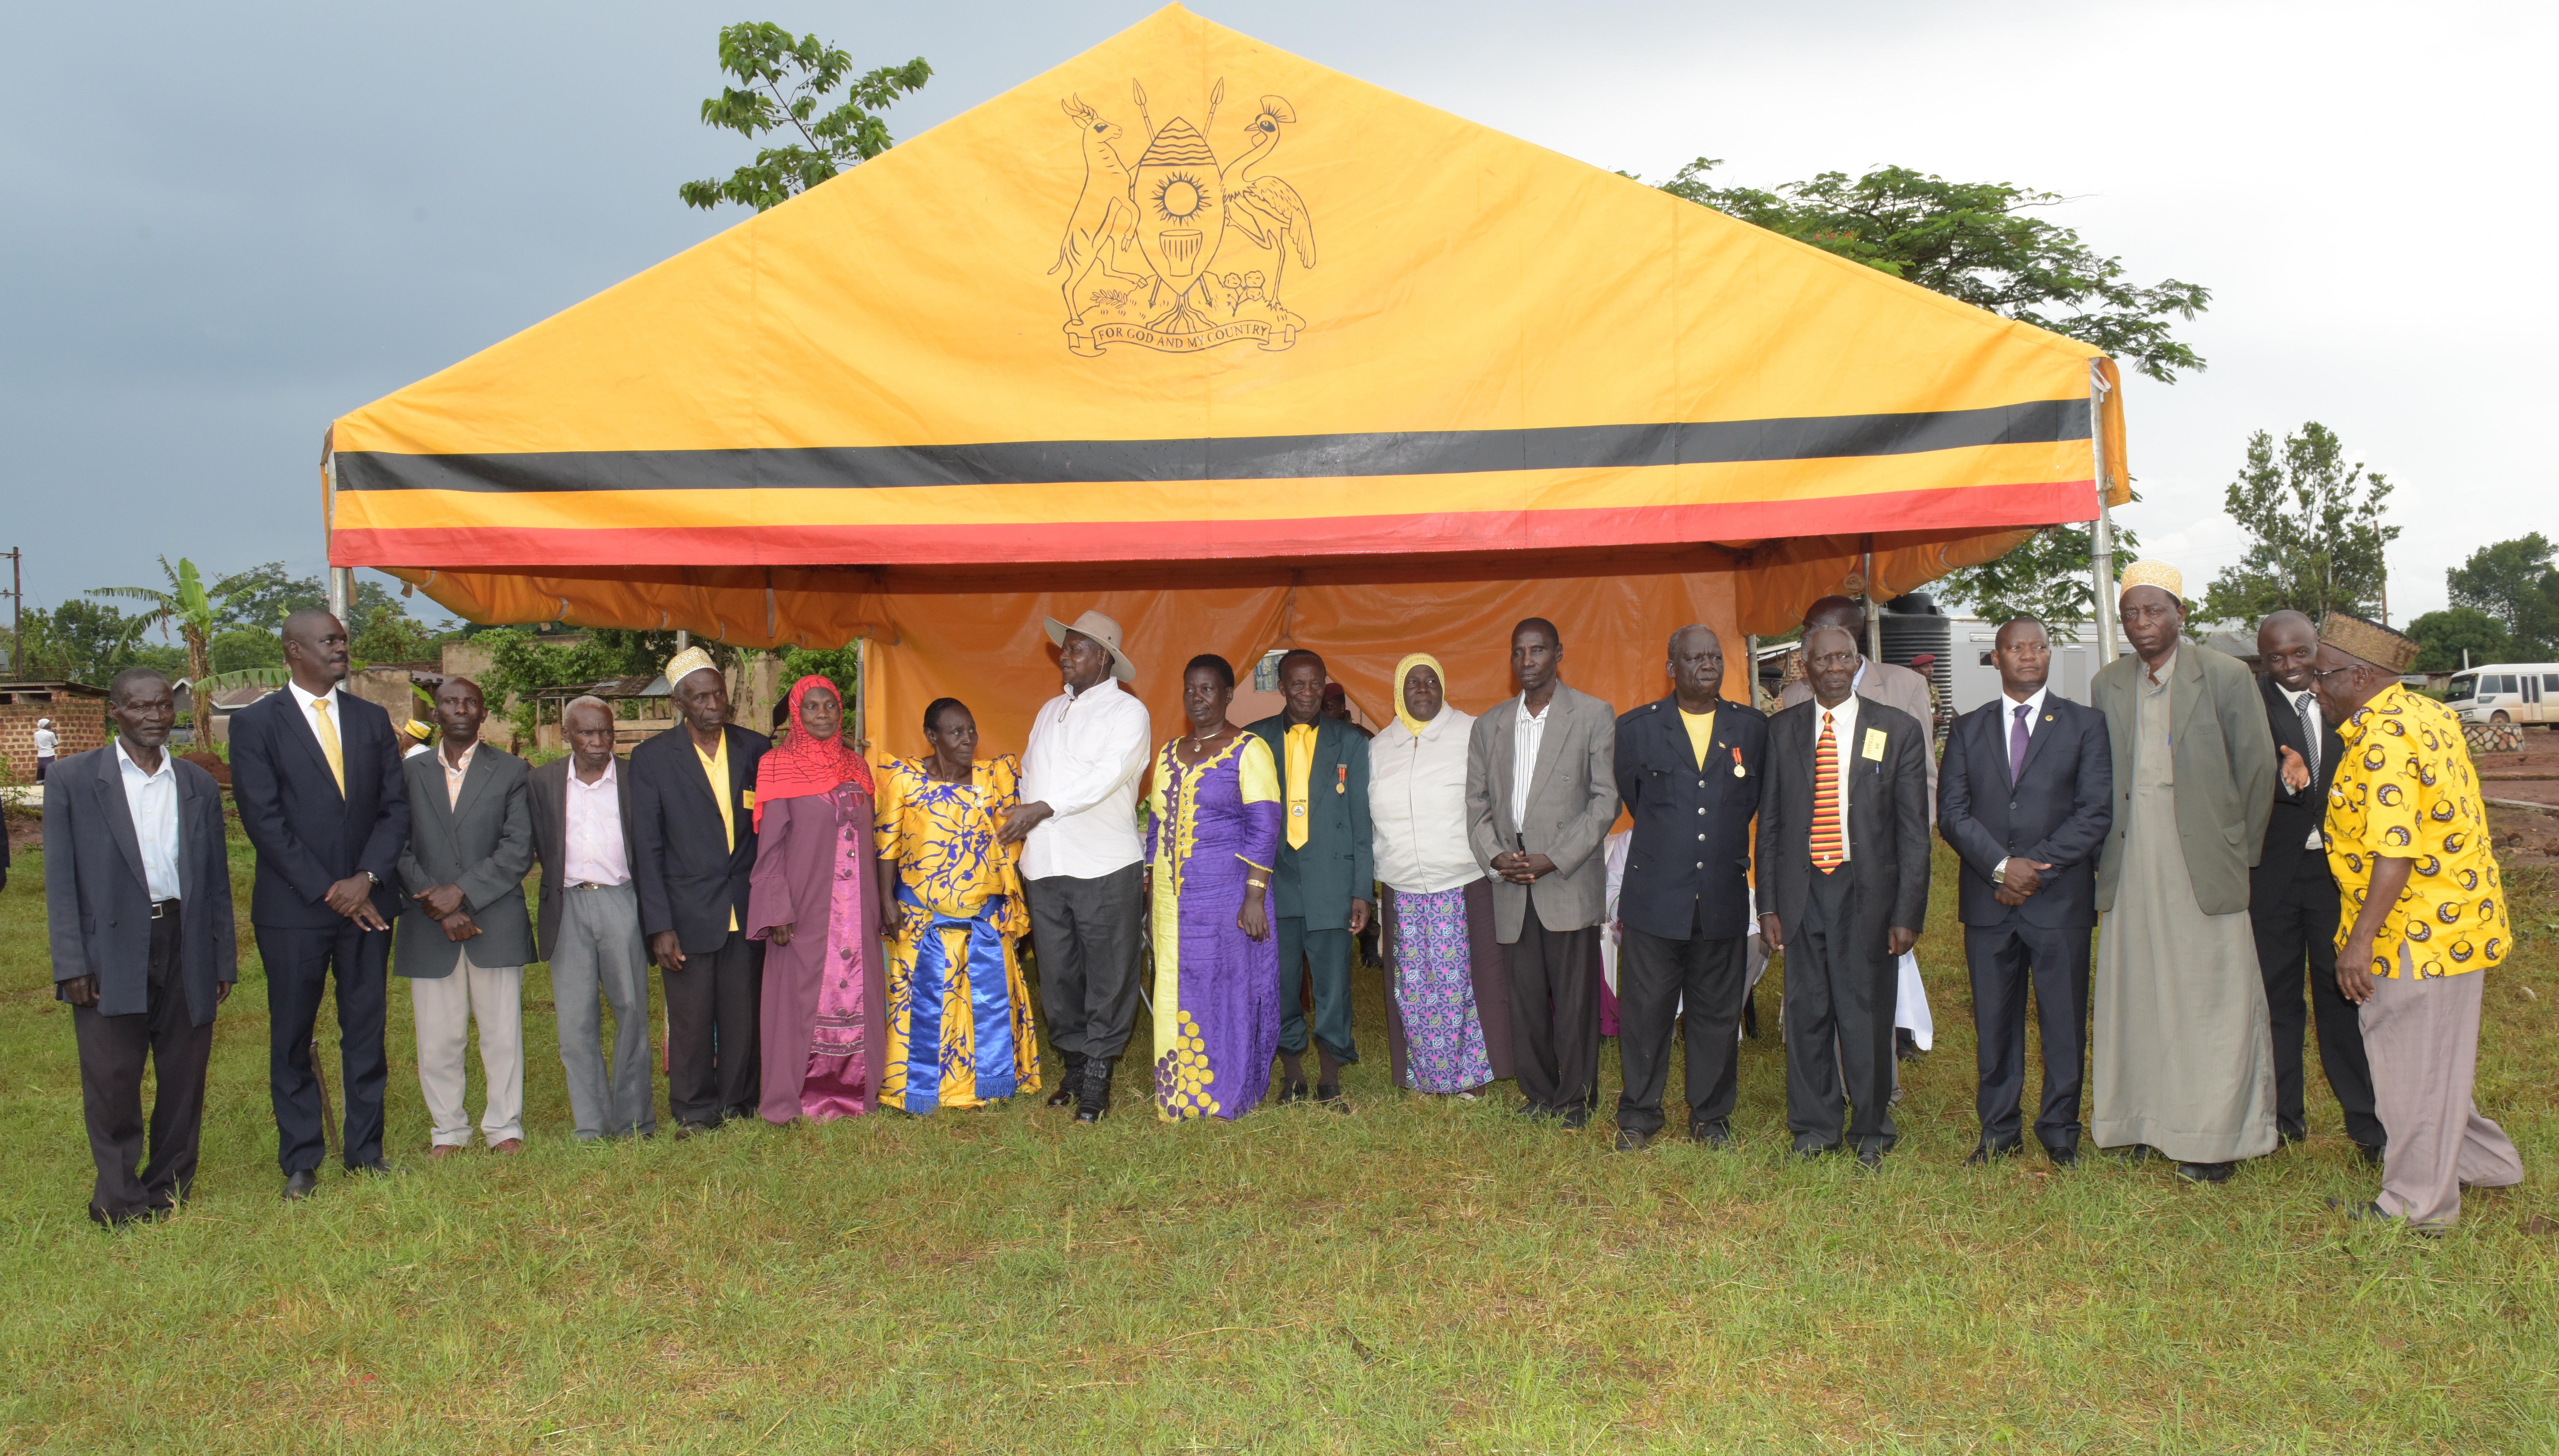 President Museveni poses for a group photo with freedom fighters in Masulita